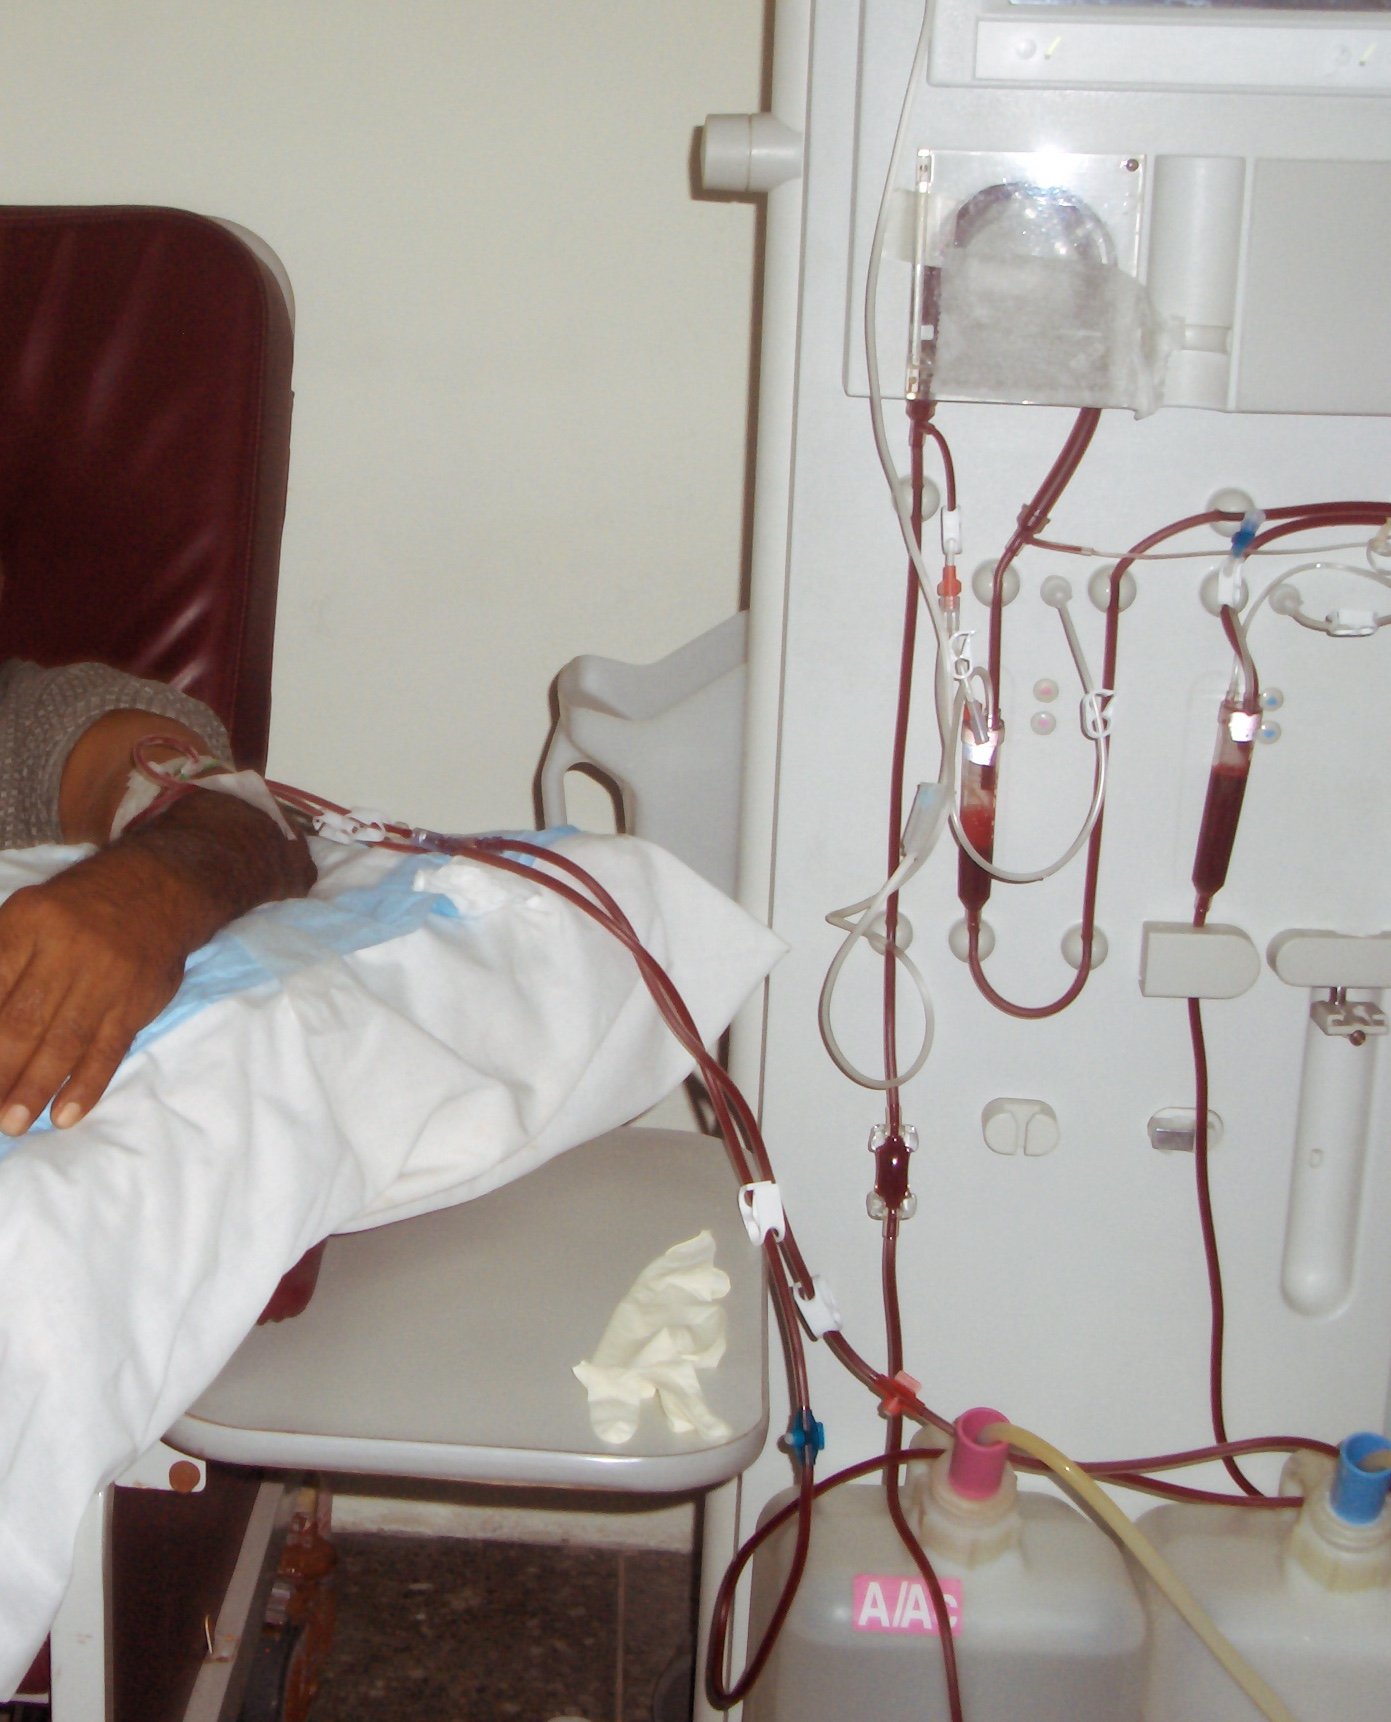 Medicare Must Increase Access to Improvements in Dialysis Care